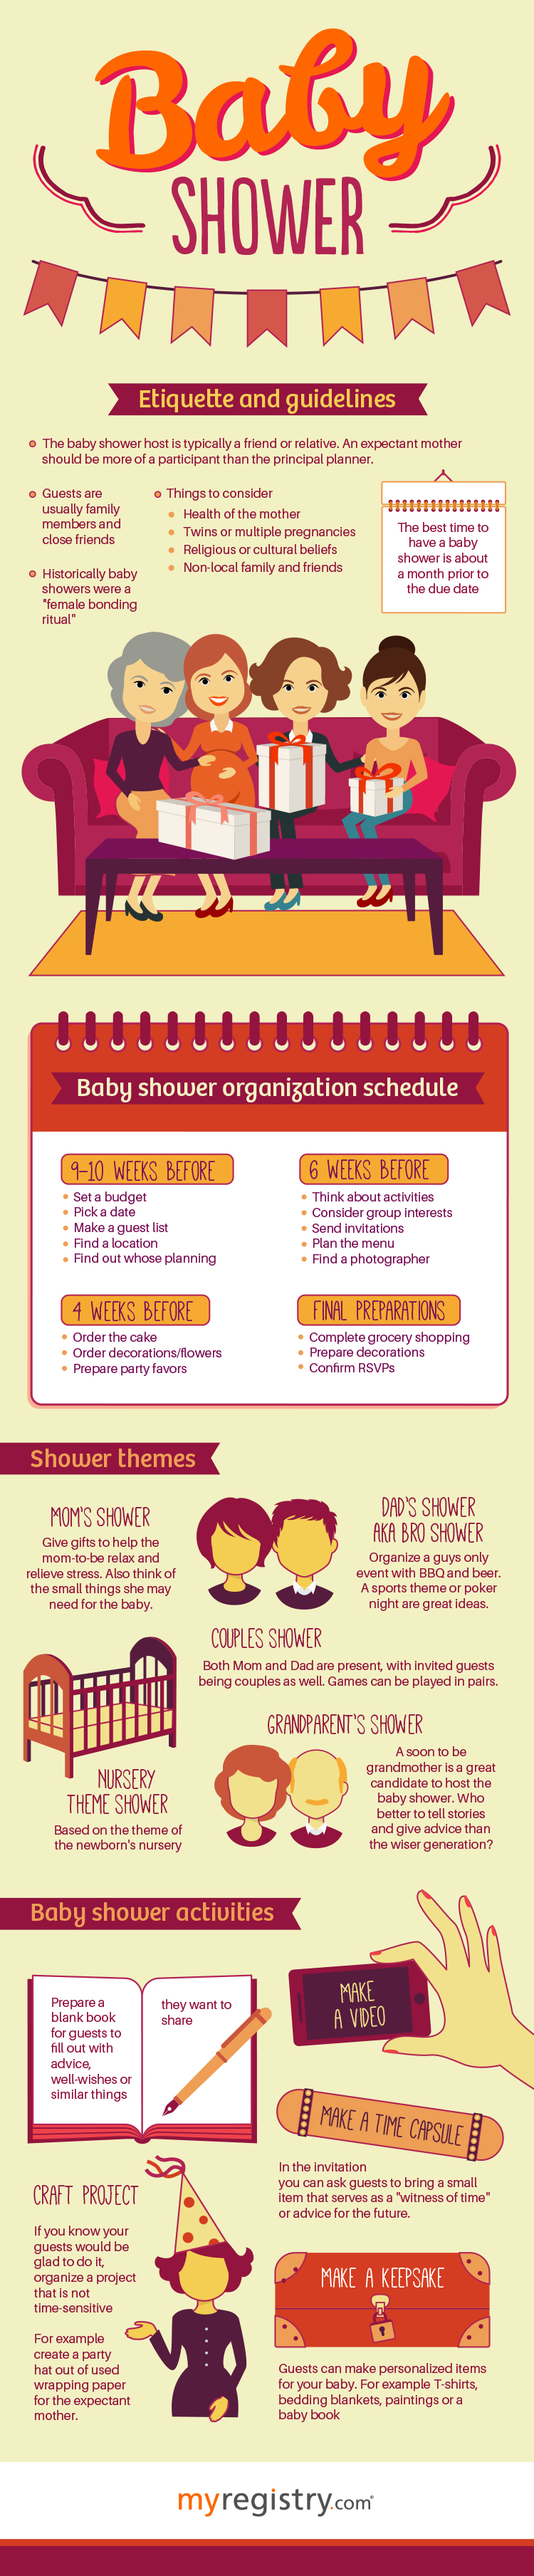 Baby Shower Etiquette and Guidlines Infographic